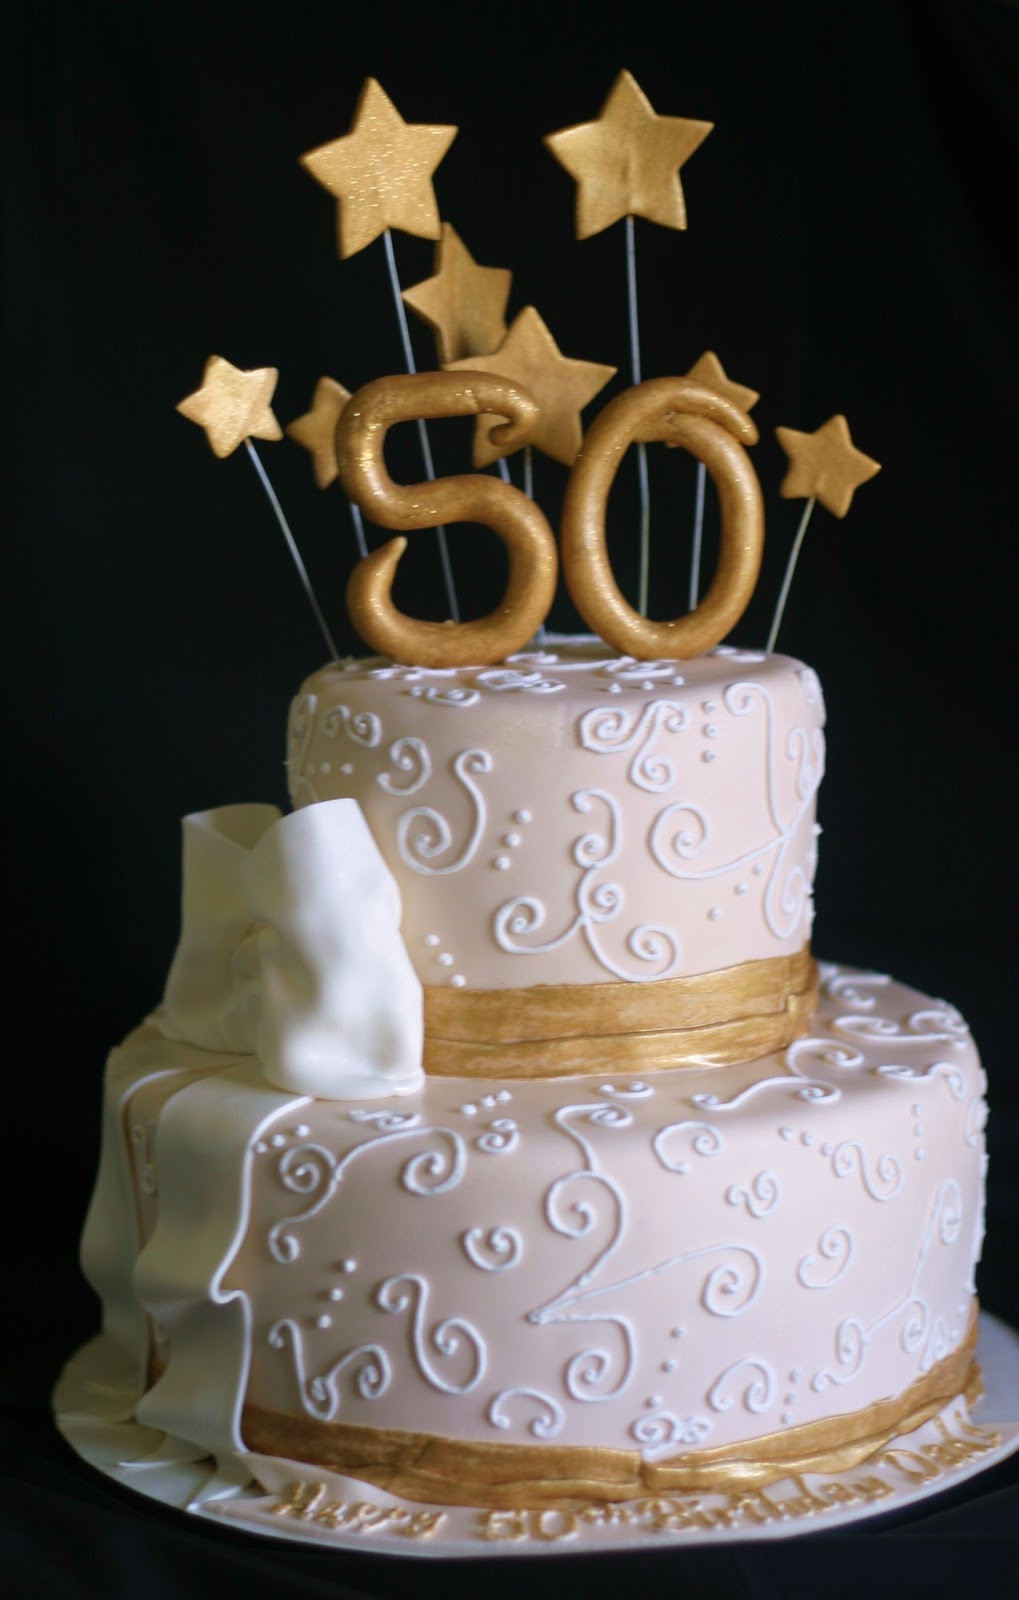 50th Birthday Cake Decorating Ideas
 Pink Little Cake Gold and light ivory 50th Birthday Cake